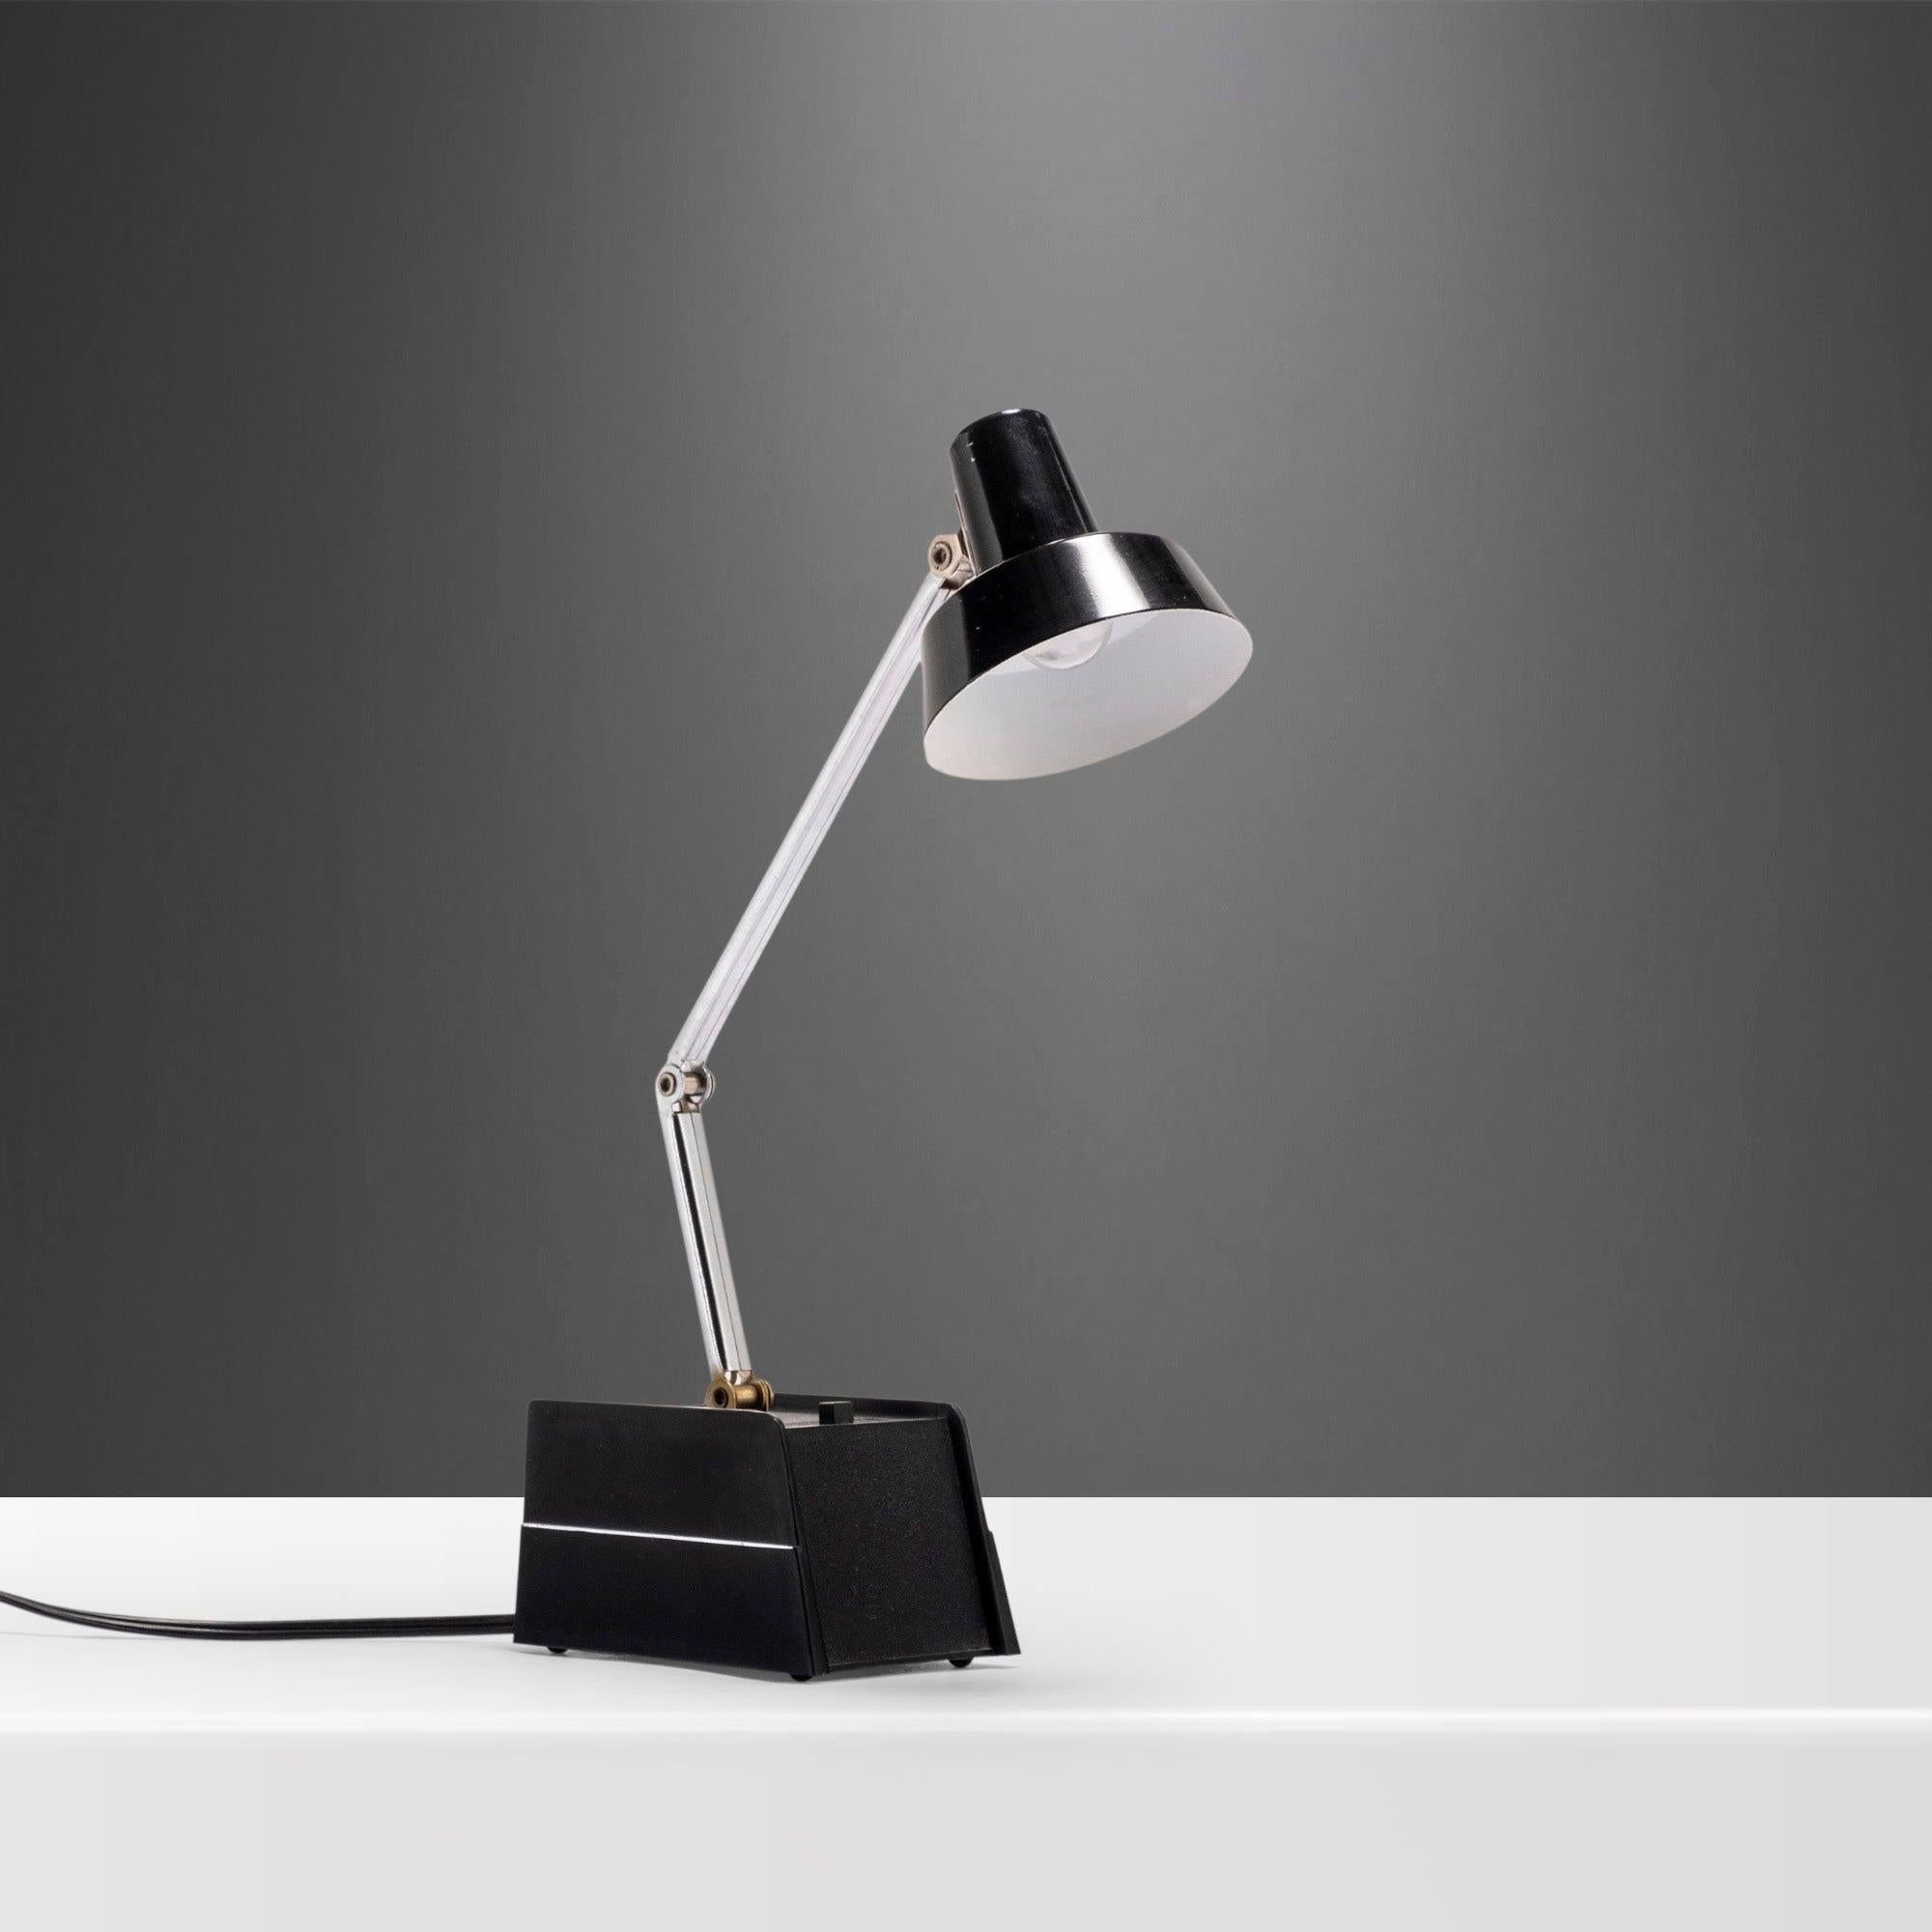 Mid-Century Modern Industrial Desk Lamp by Mobilite from NASA Offices, Taiwan 1